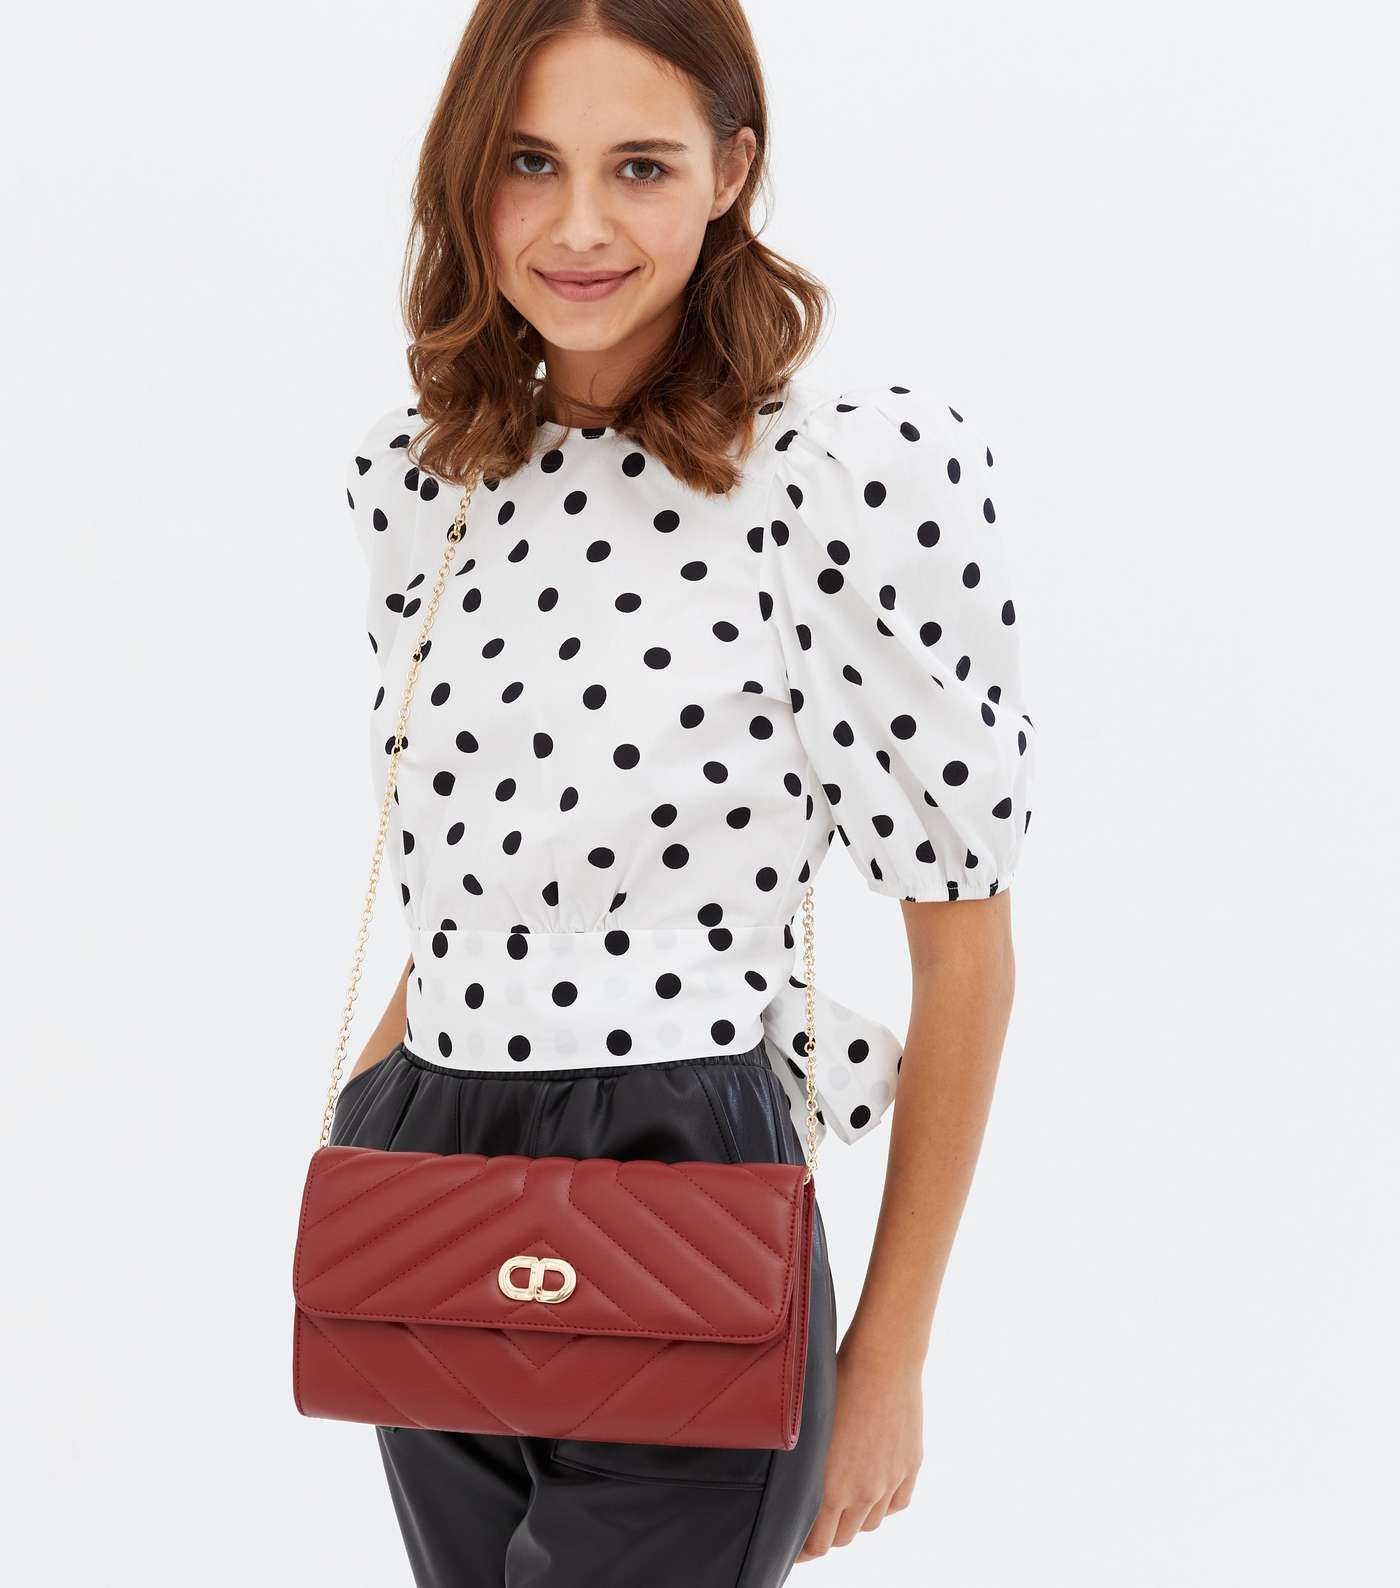 Red Quilted Cross Body Chain Clutch Bag Image 2